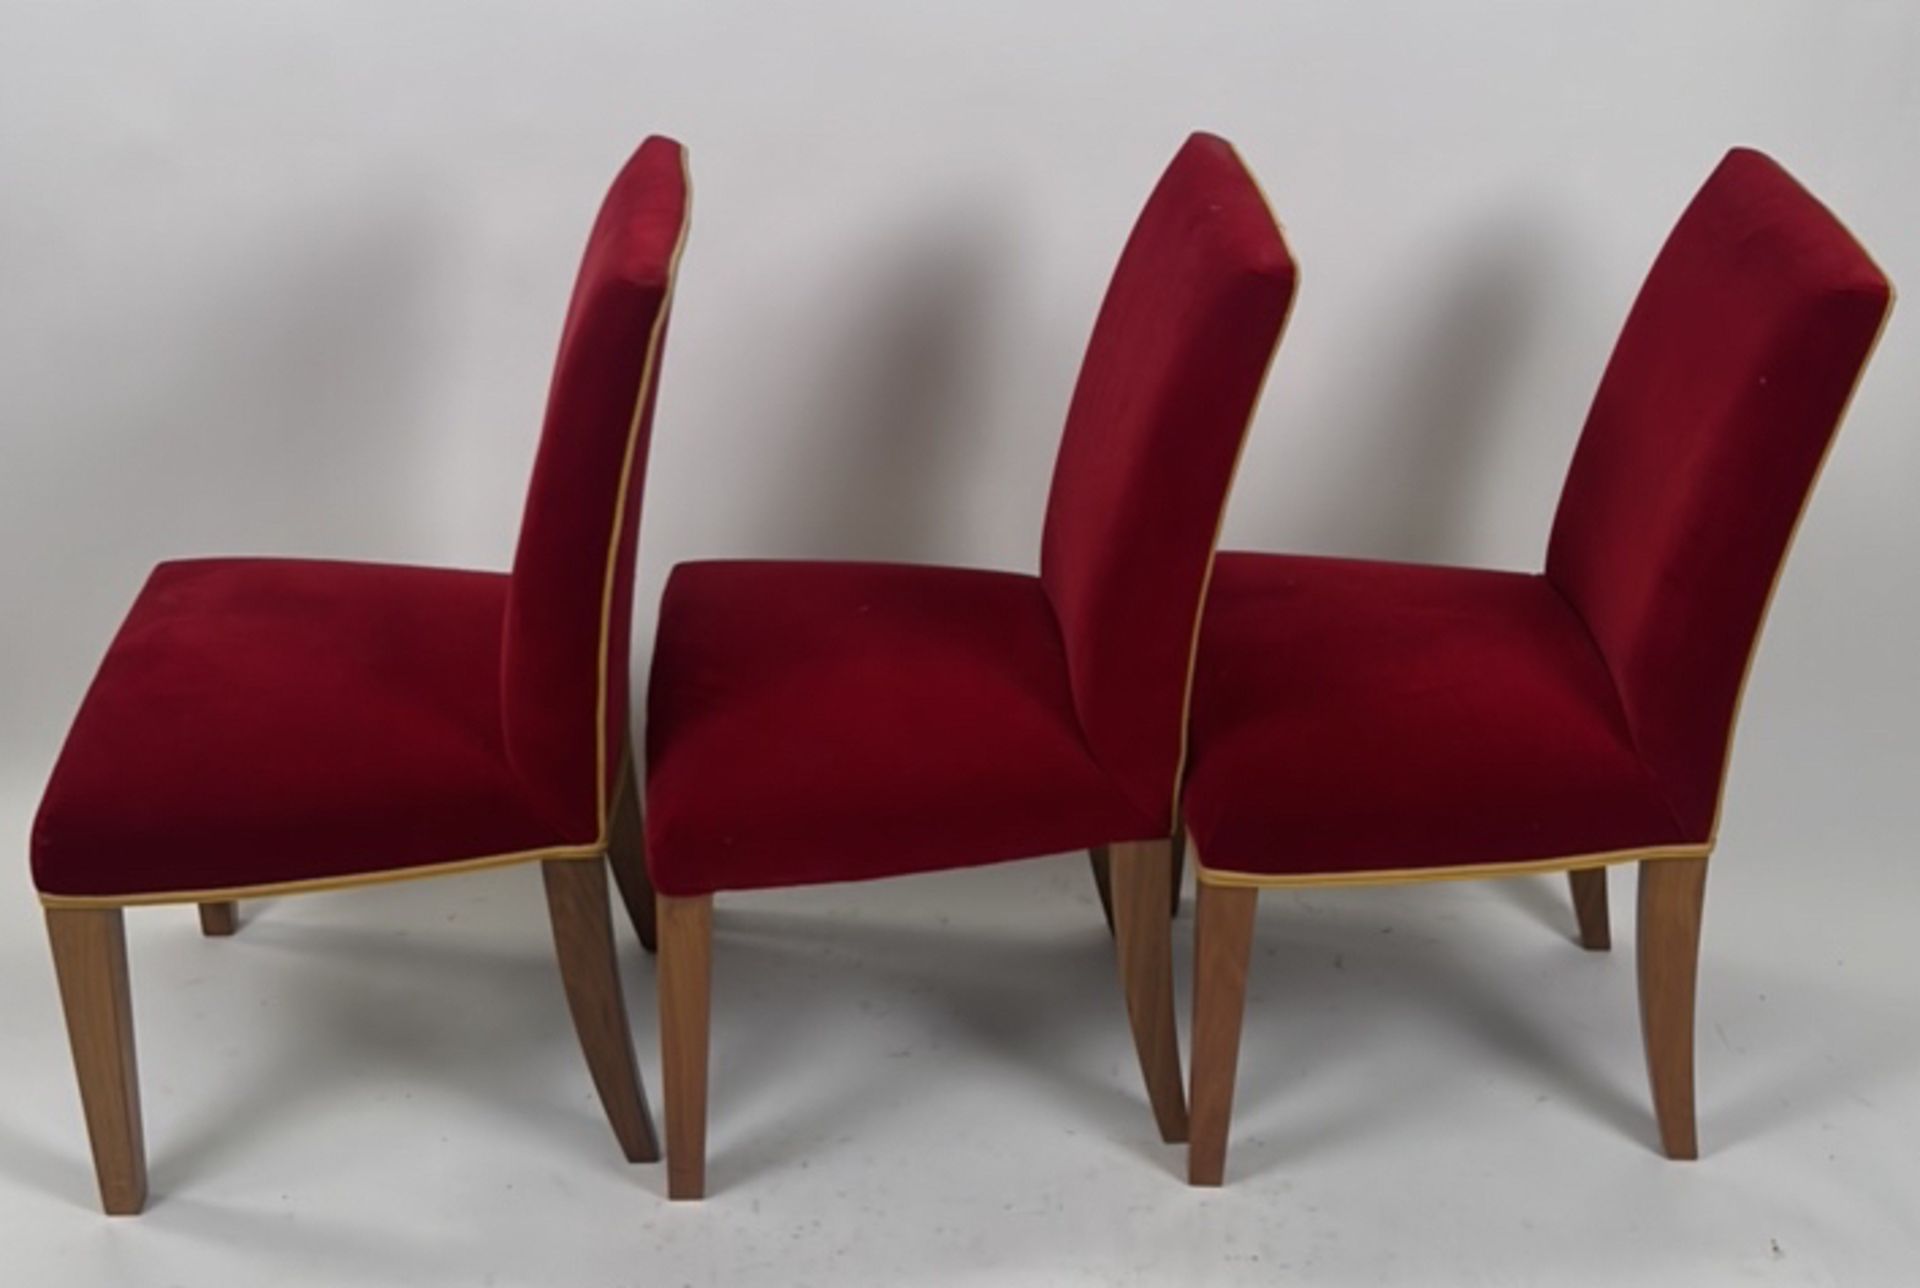 Trio of David Linley Dining Chairs - Image 4 of 7